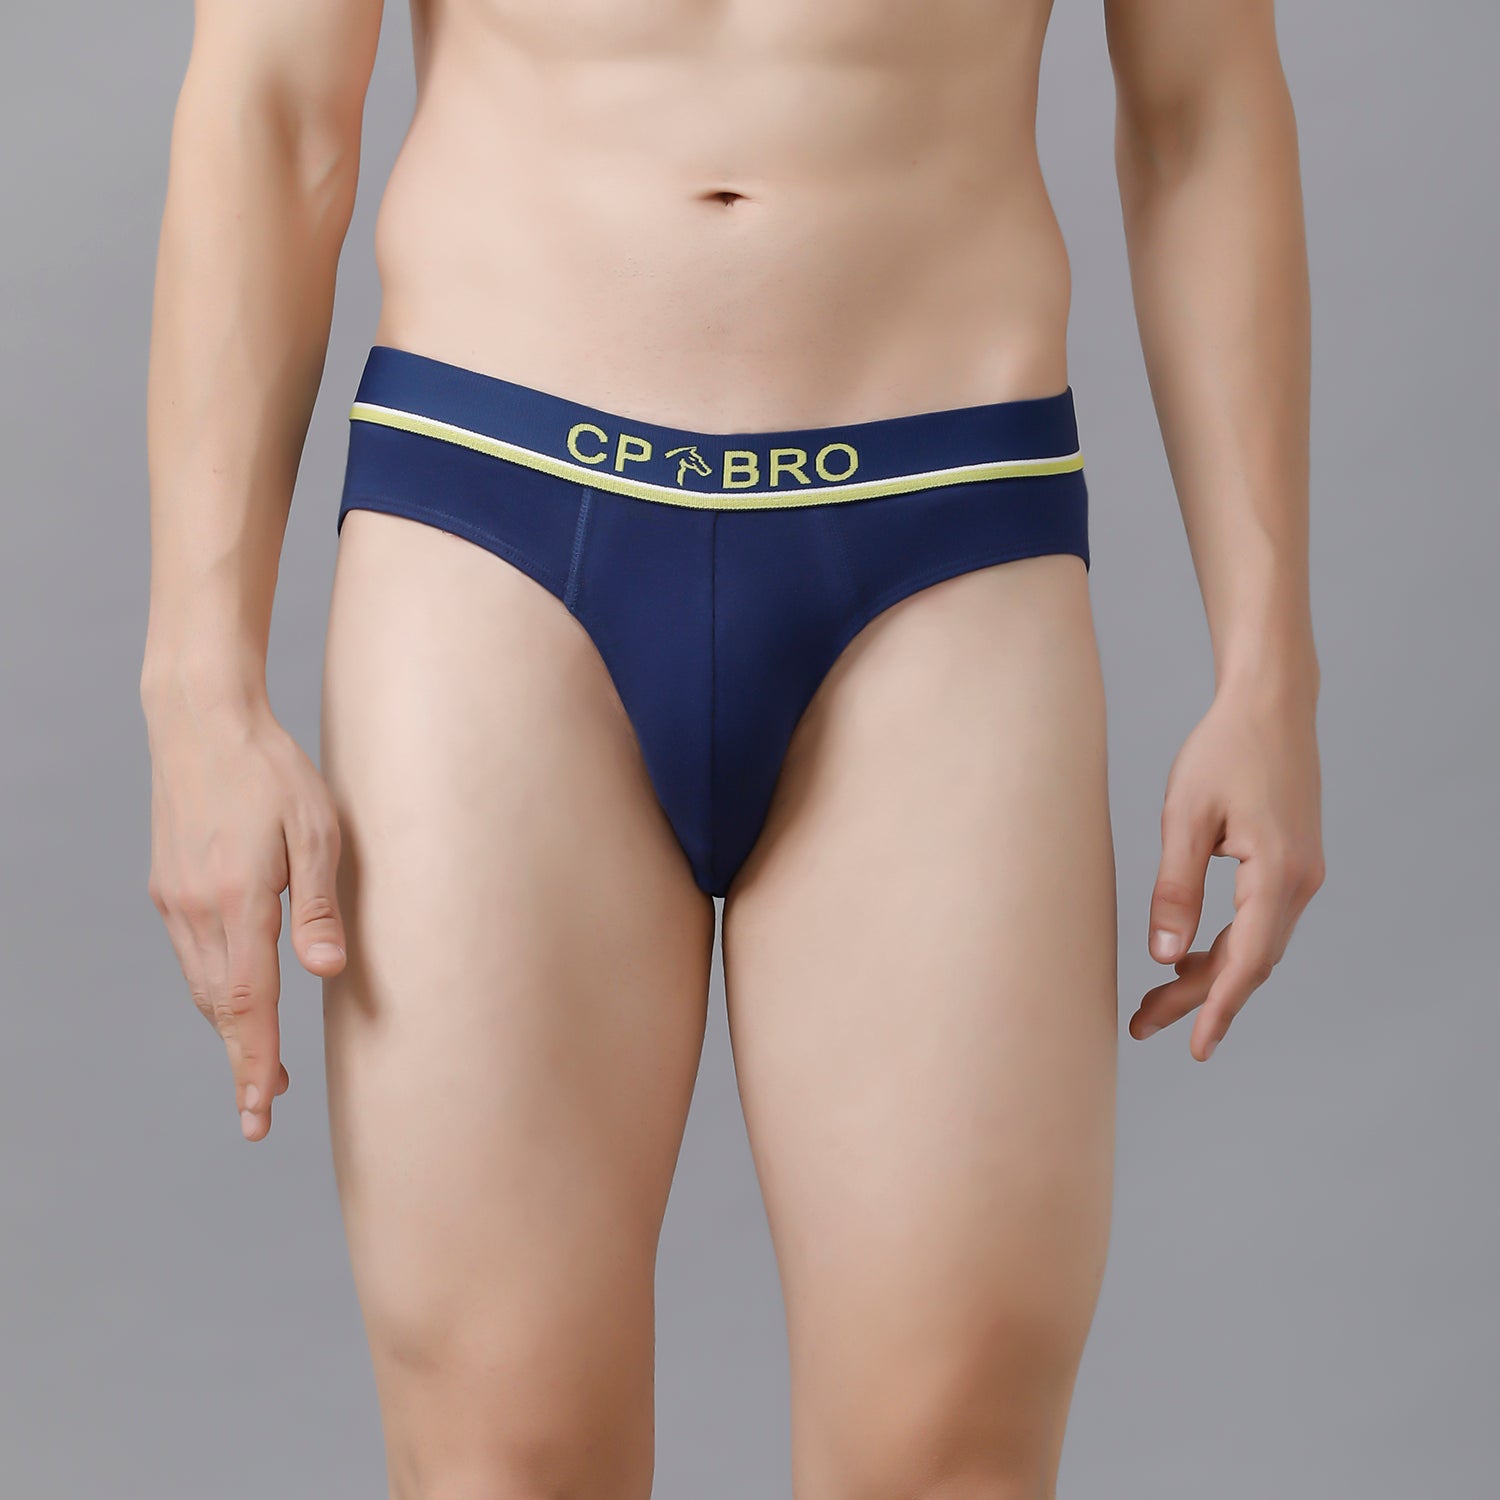 CP BRO Printed Briefs with Exposed Waistband Value - Black Dot (Pack of 2)